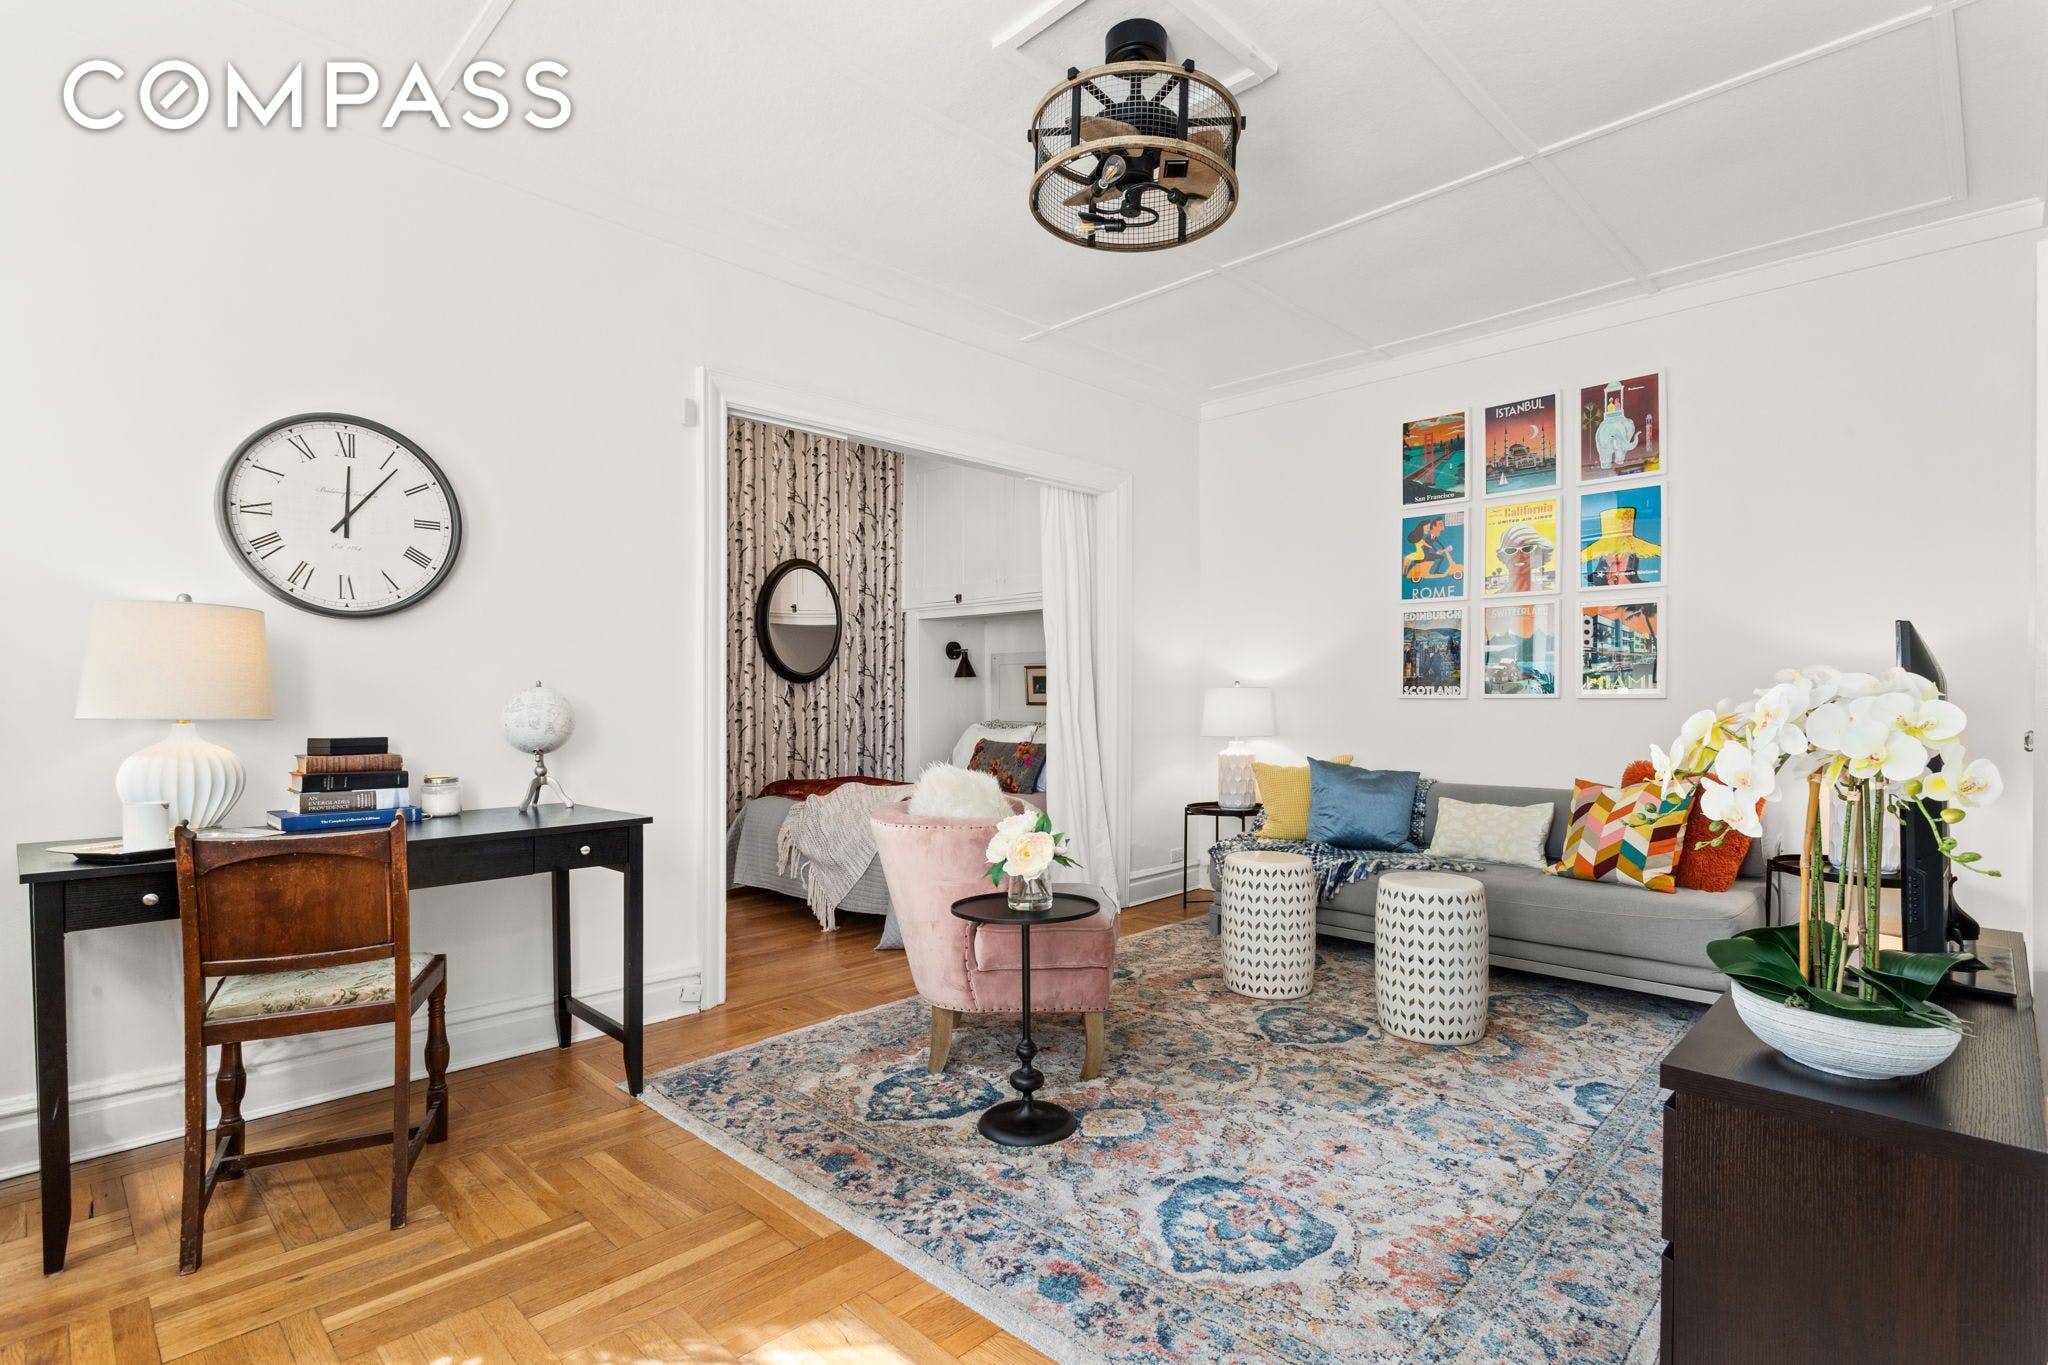 Can you really have a cottage with your own front porch in Manhattan for under 500K ?